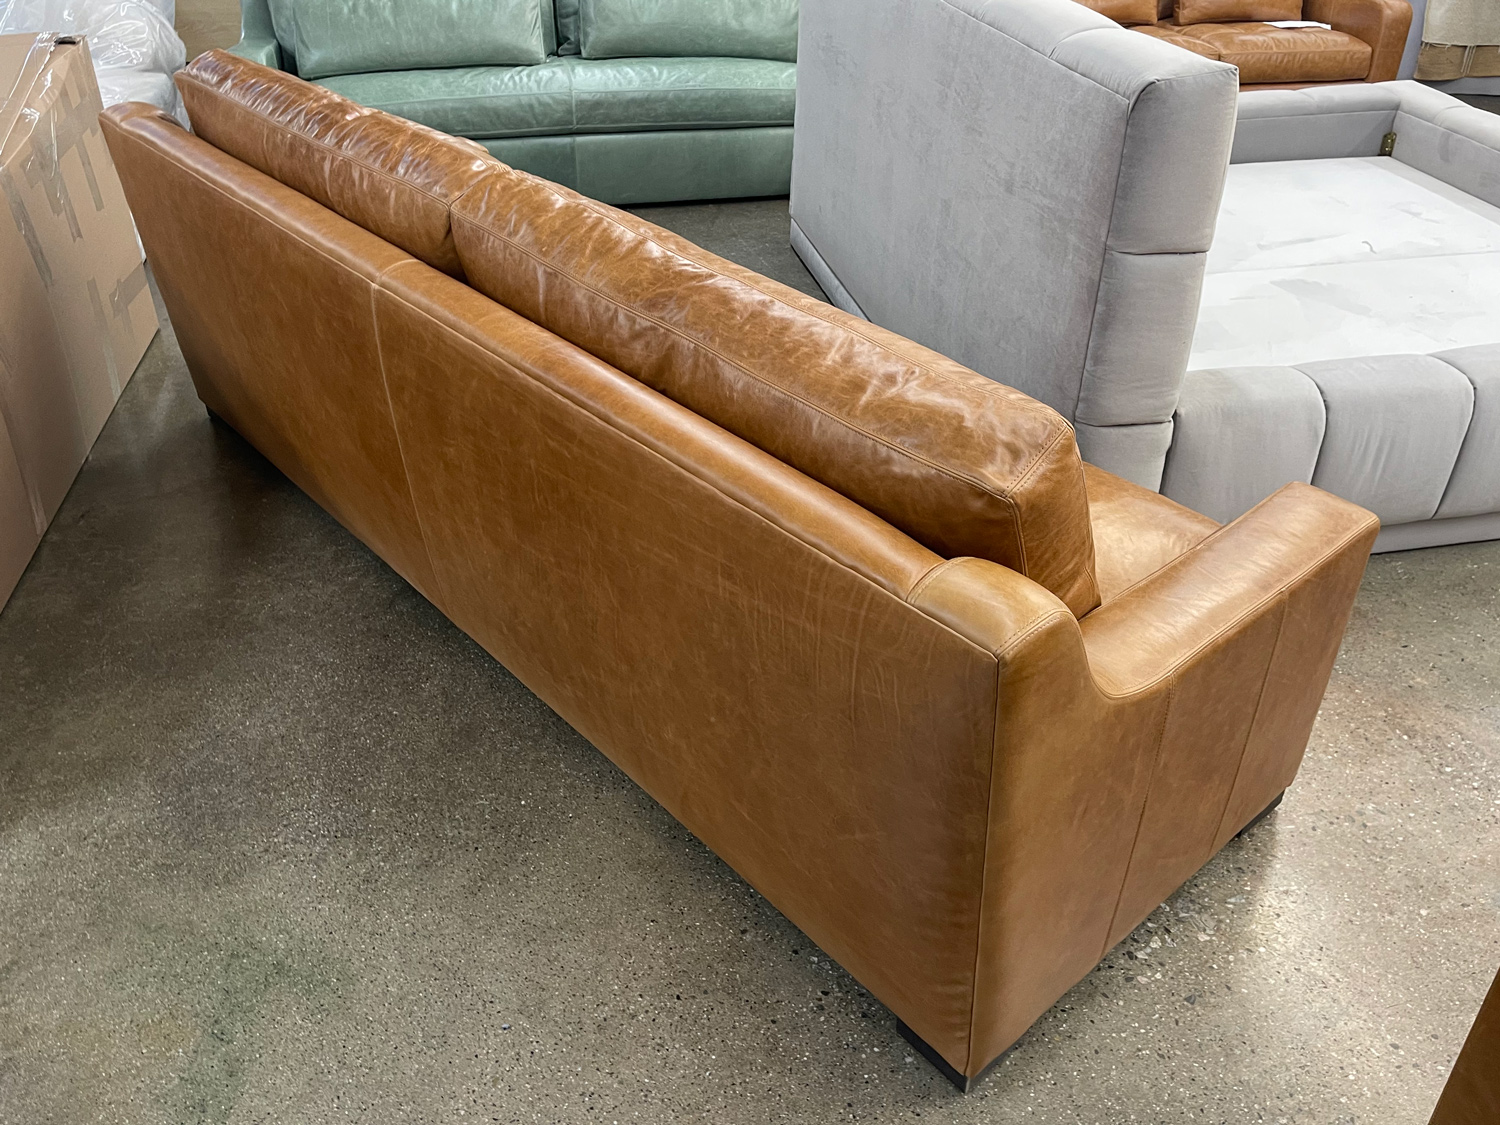 Julien Track Arm Sofa in Mont Blanc Sycamore Leather - 108" x 38" - rear angle view